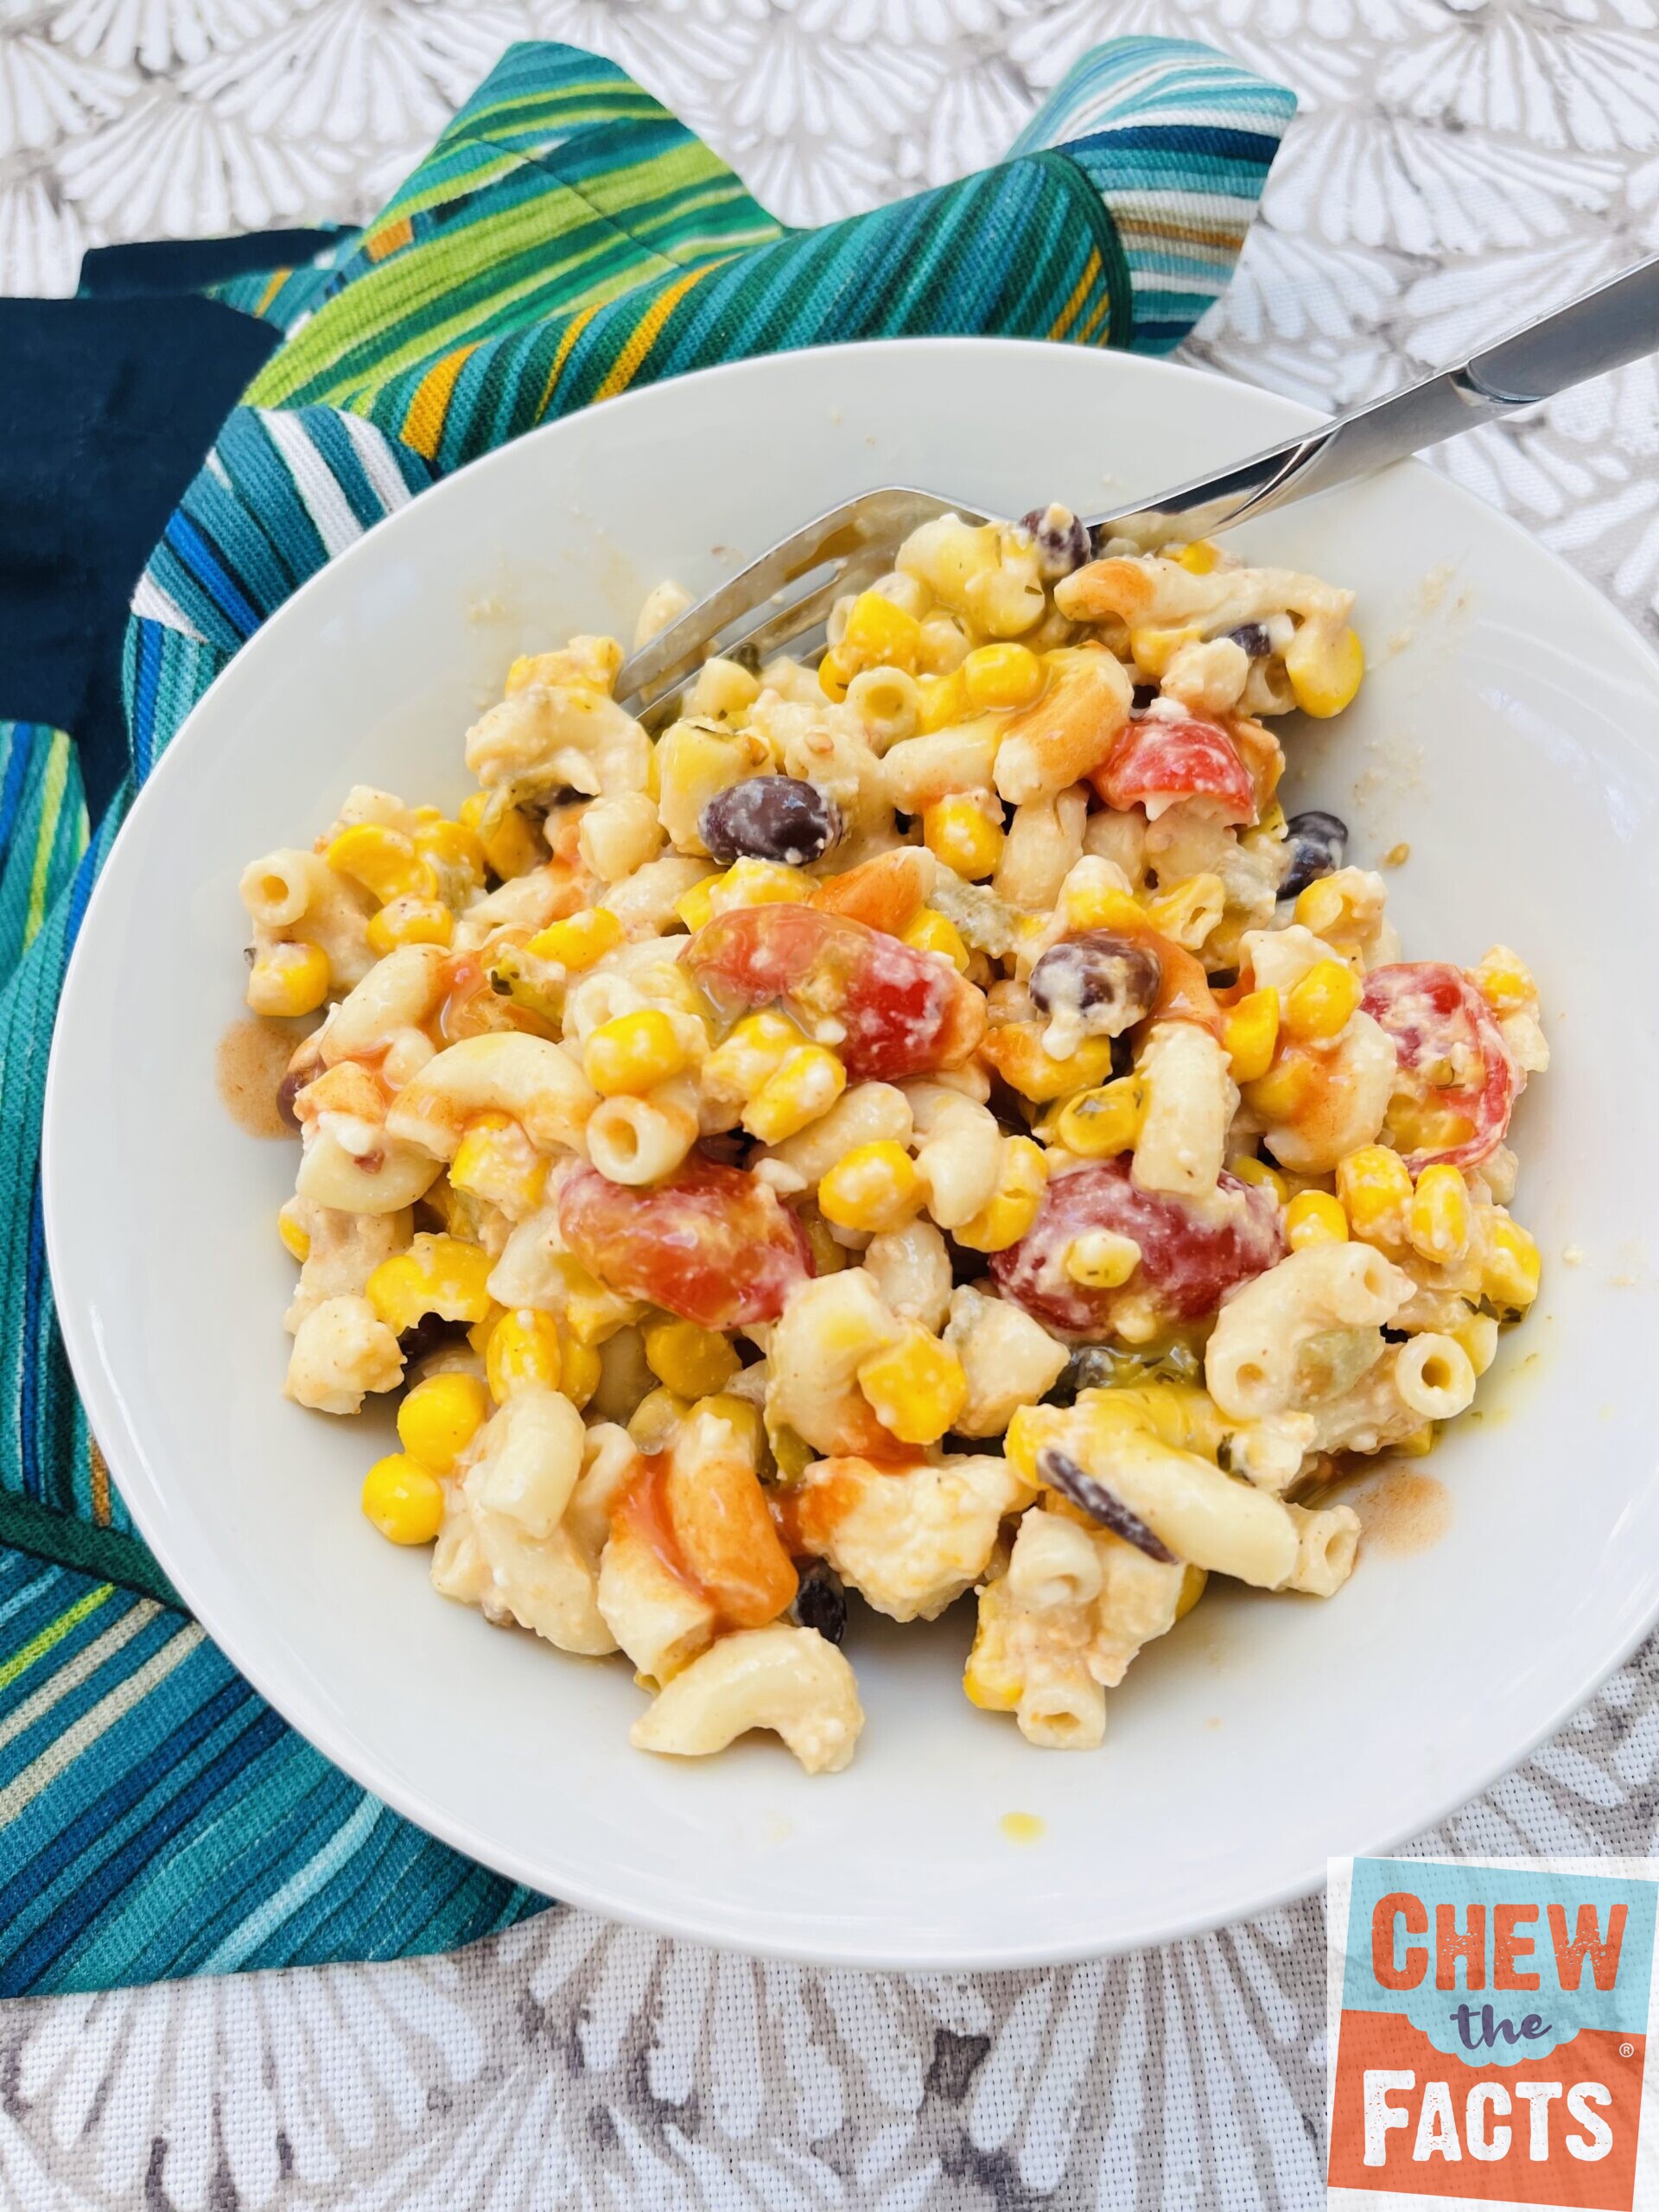 Street Corn Pasta Salad – Rust Nutrition Services – Chew The Facts®